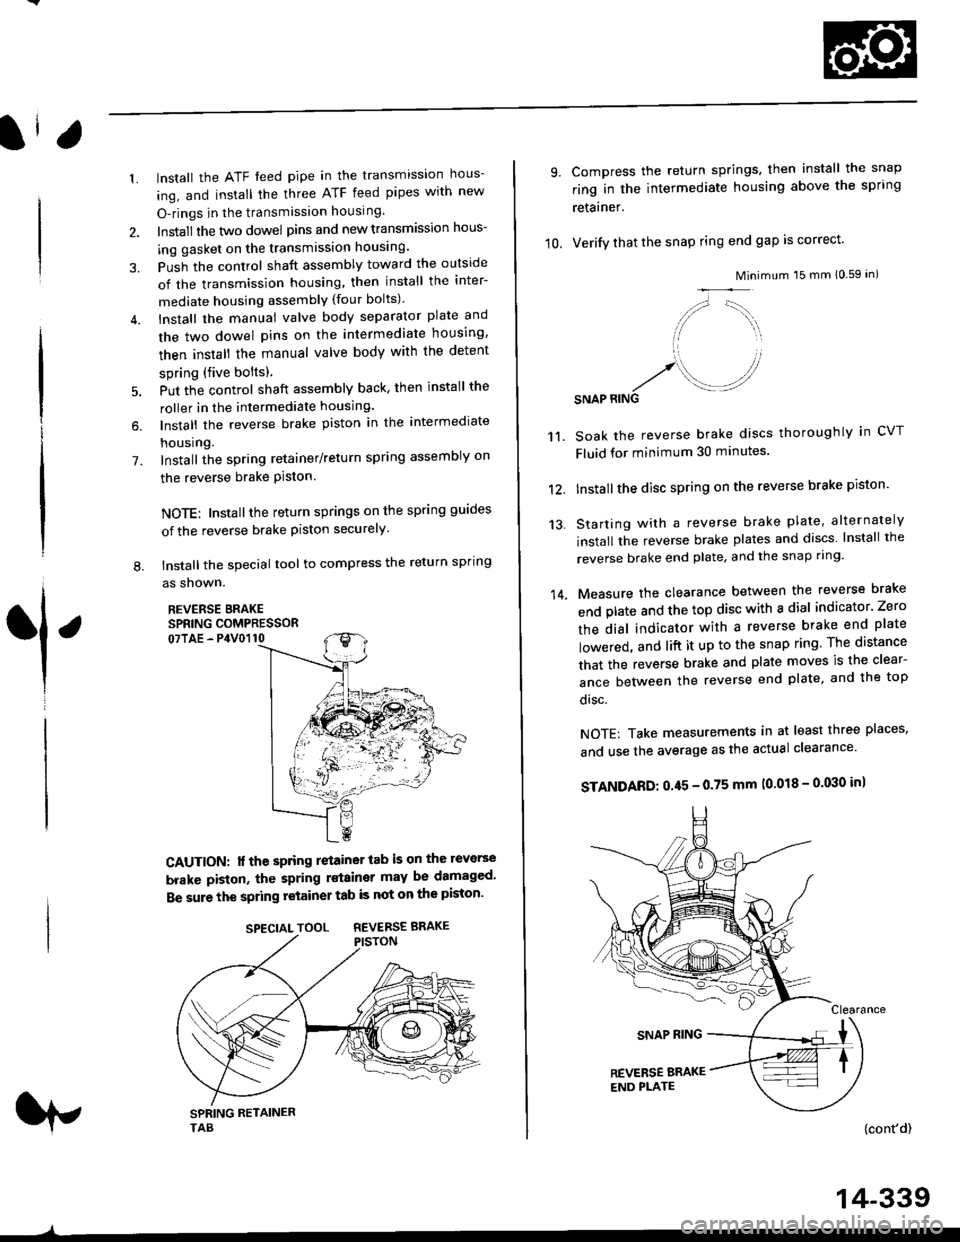 HONDA CIVIC 1997 6.G Workshop Manual 1.
7.
lnstall the ATF feed pipe in the transmission hous-
ing, and install the three ATF feed pipes with new
O-rings in the transmission housing,
Install the two dowel pins and new transmission hous-
